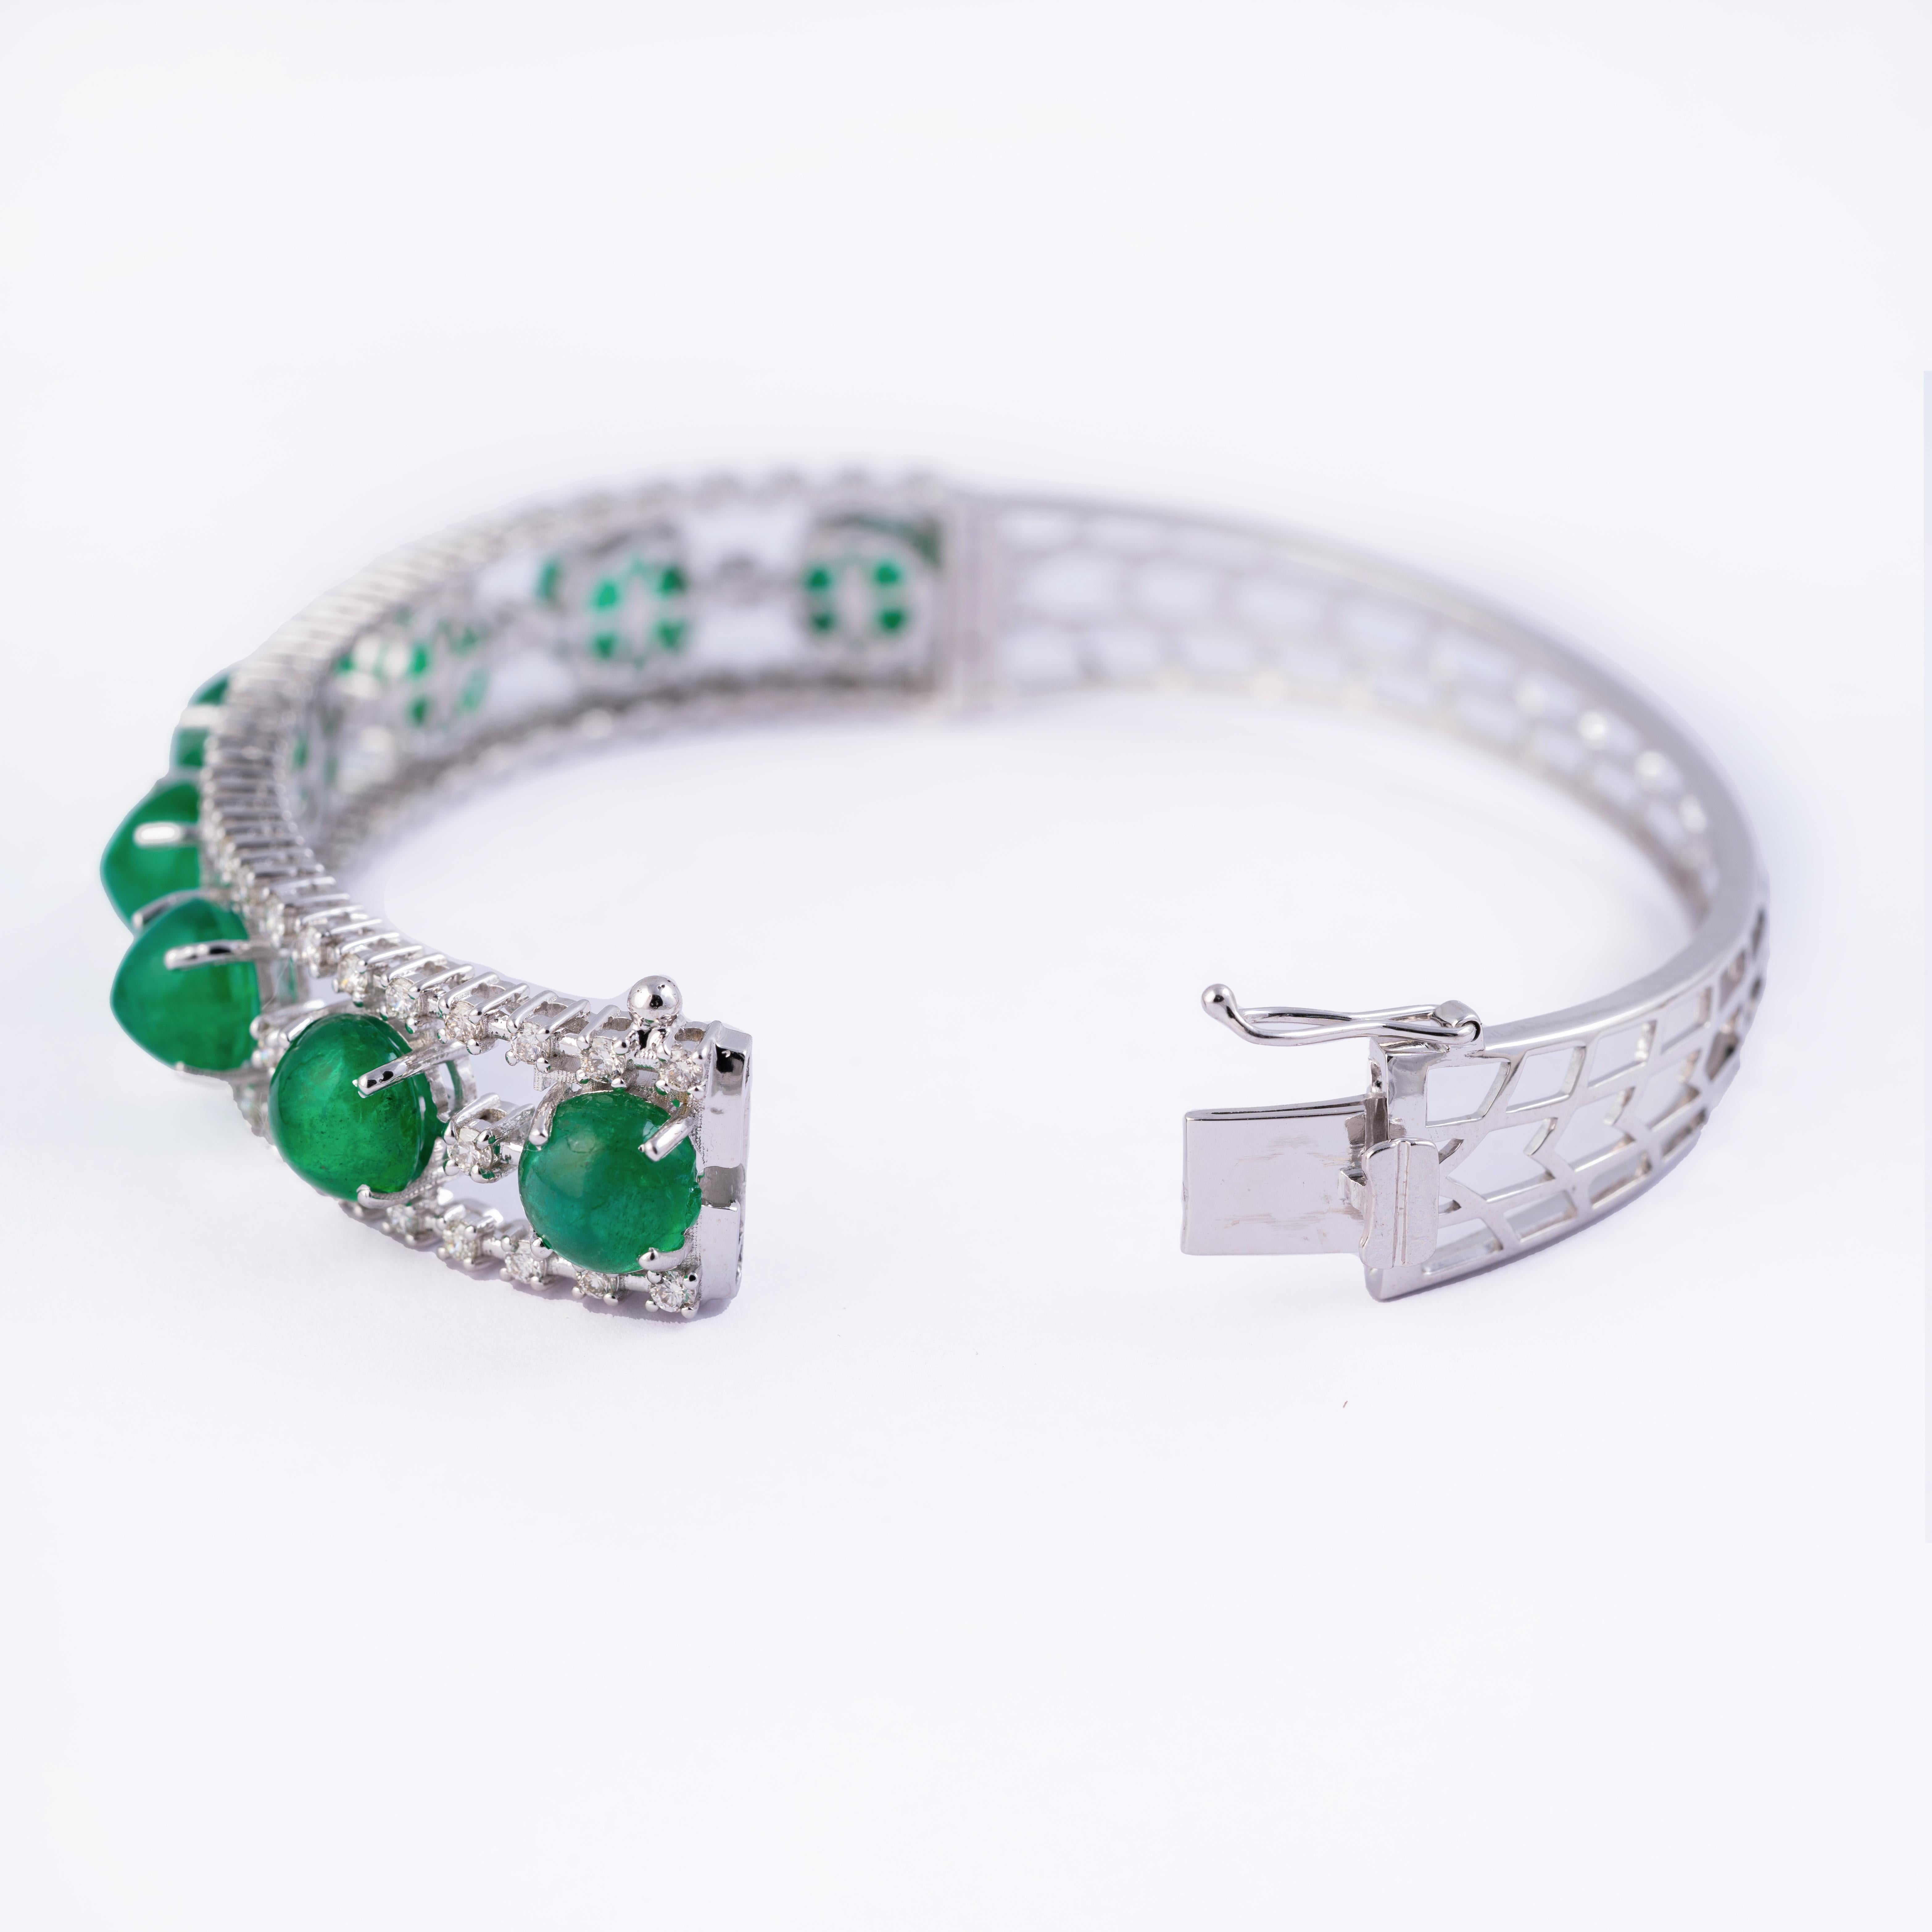 Emerald Cut Natural Zambian Emerald 15.18cts and 1.59cts Diamond Bracelet in 14k Gold For Sale